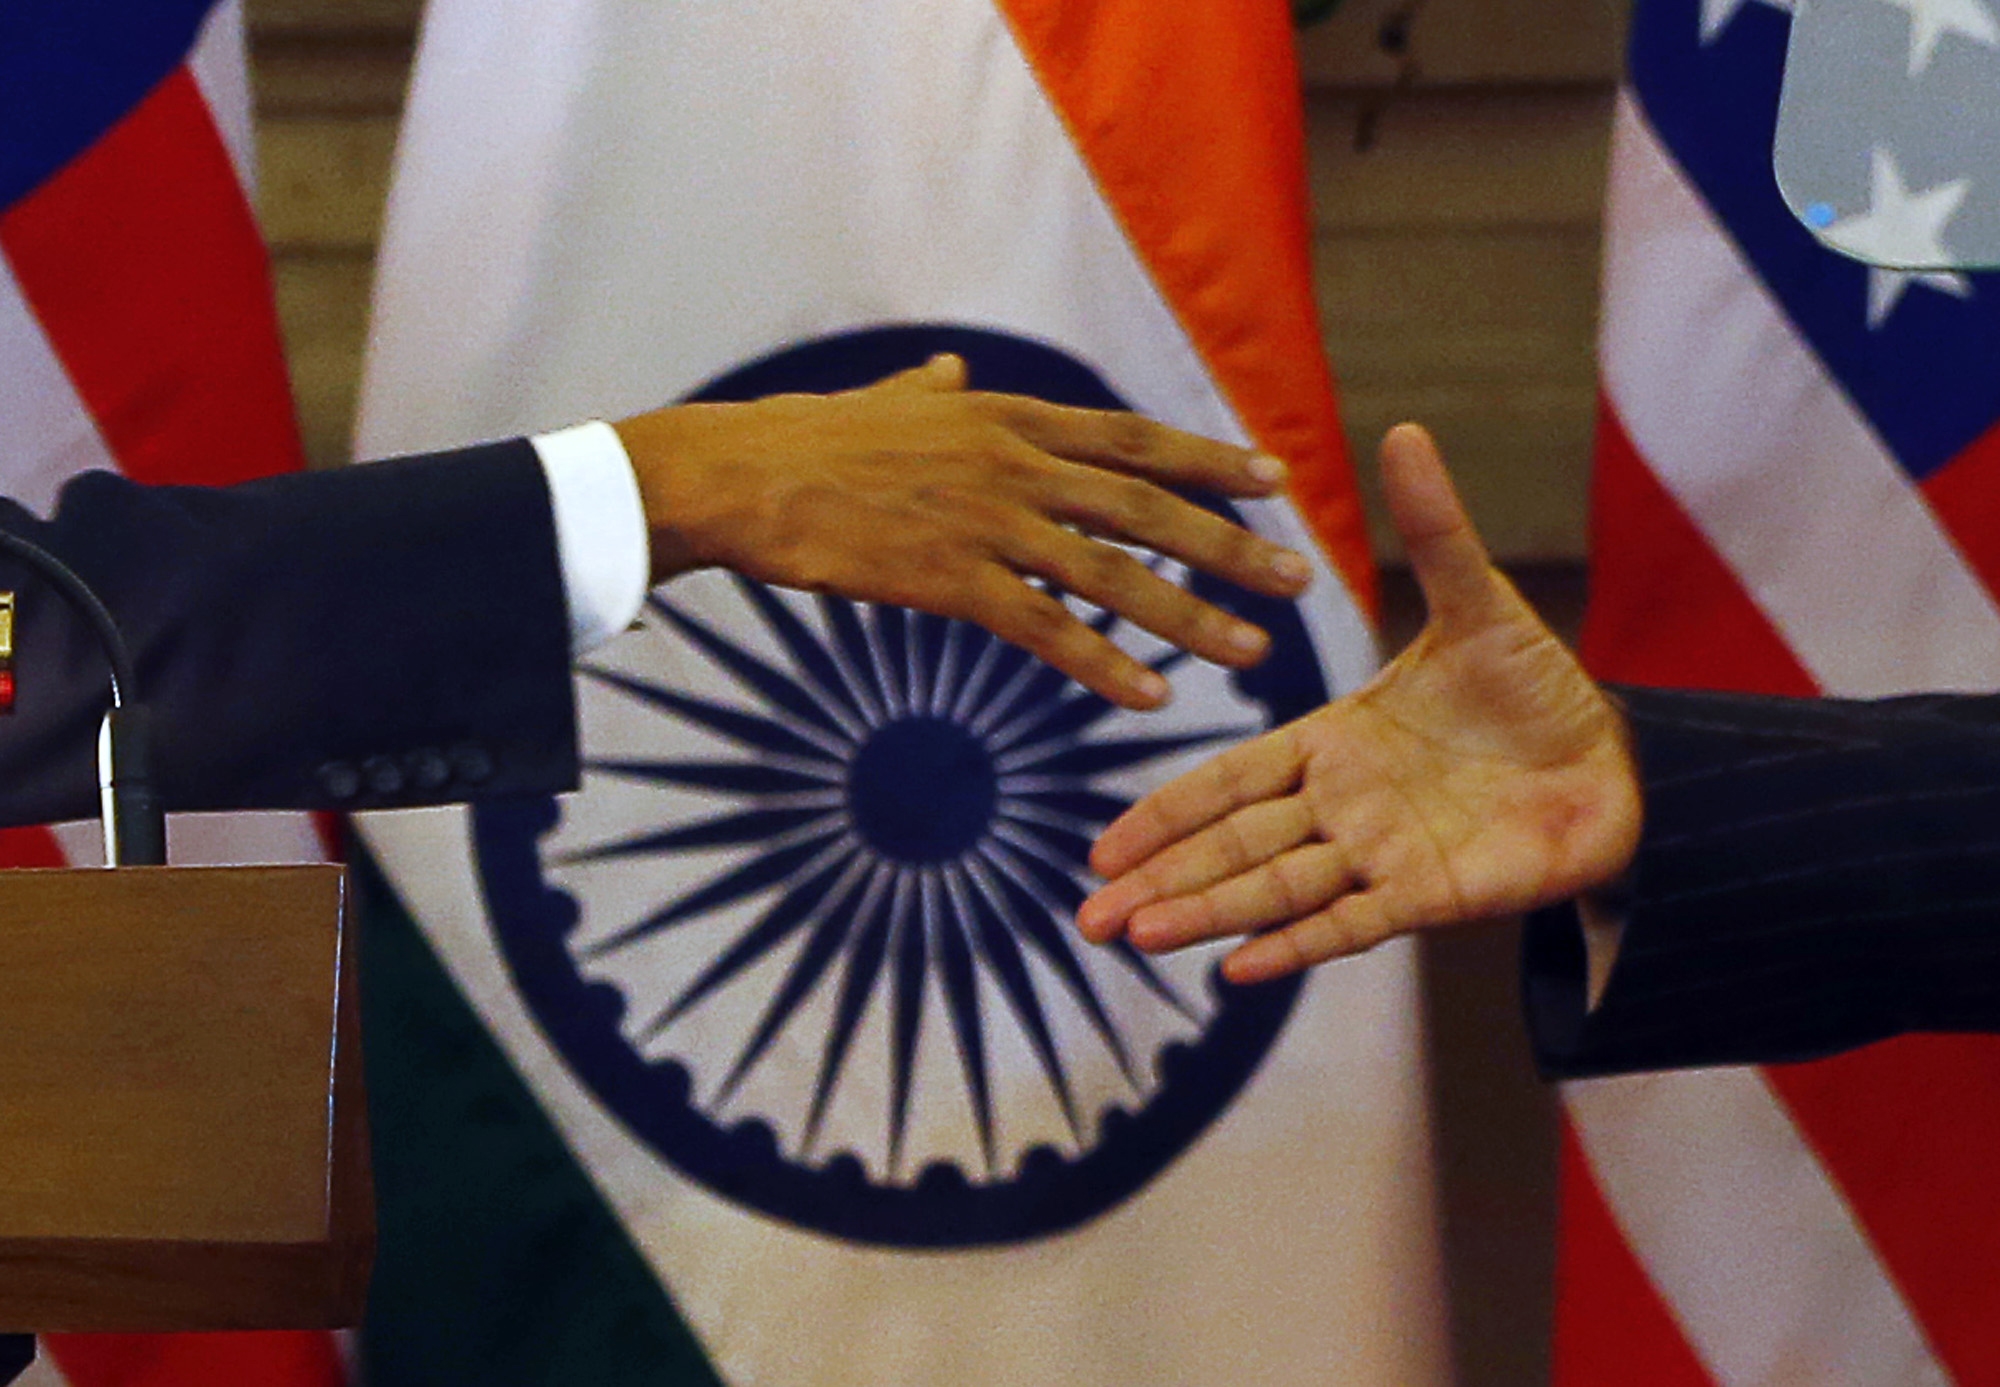 U.S. President Barack Obama, left and Indian Prime Minister Narendra Modi prepare to shake their hands after they jointly addressed the media after their talks, in New Delhi, India, Sunday, Jan. 25, 2015.